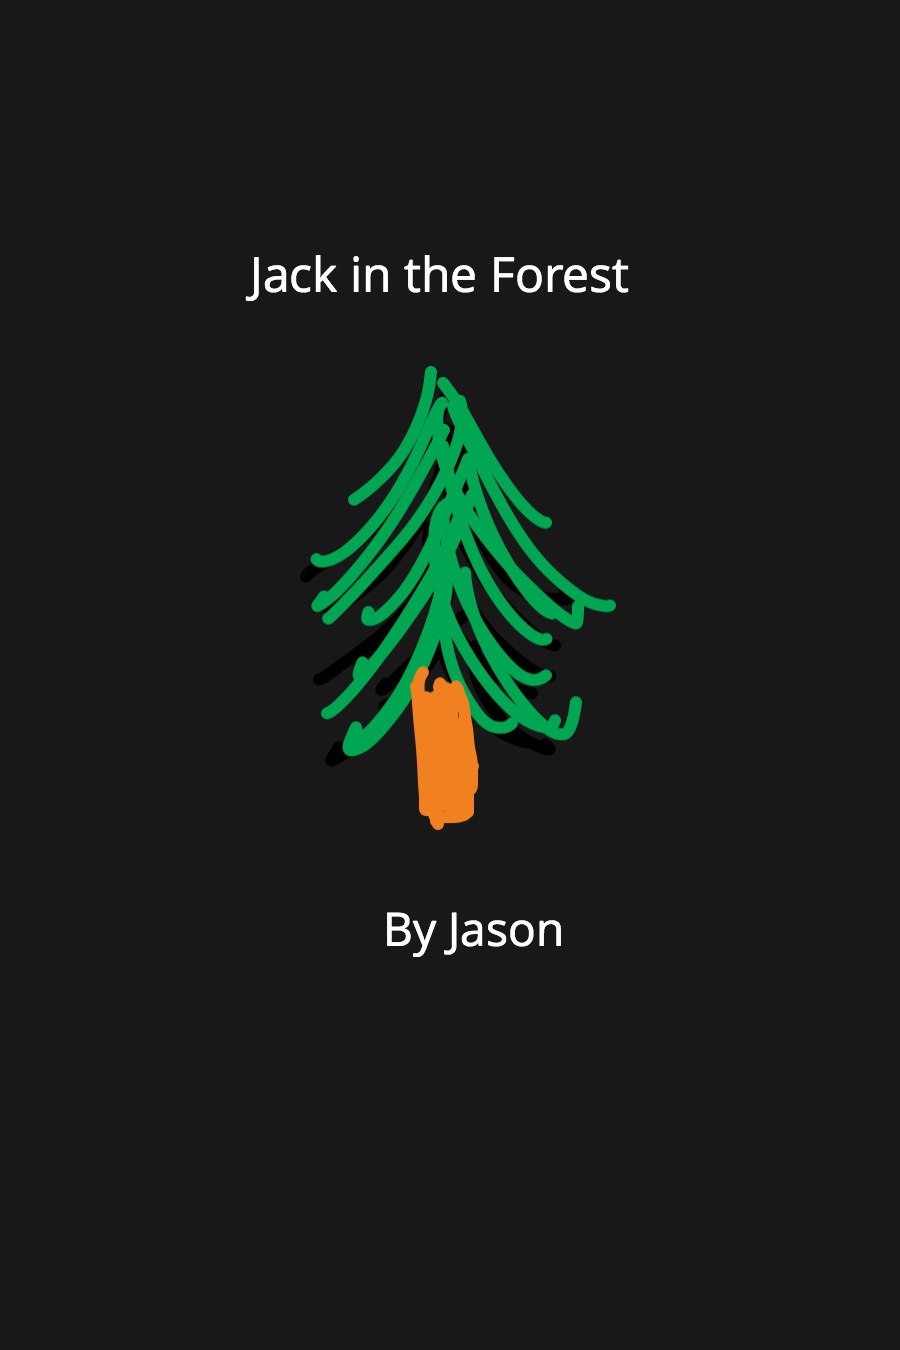 Jack in the Forest by Jason